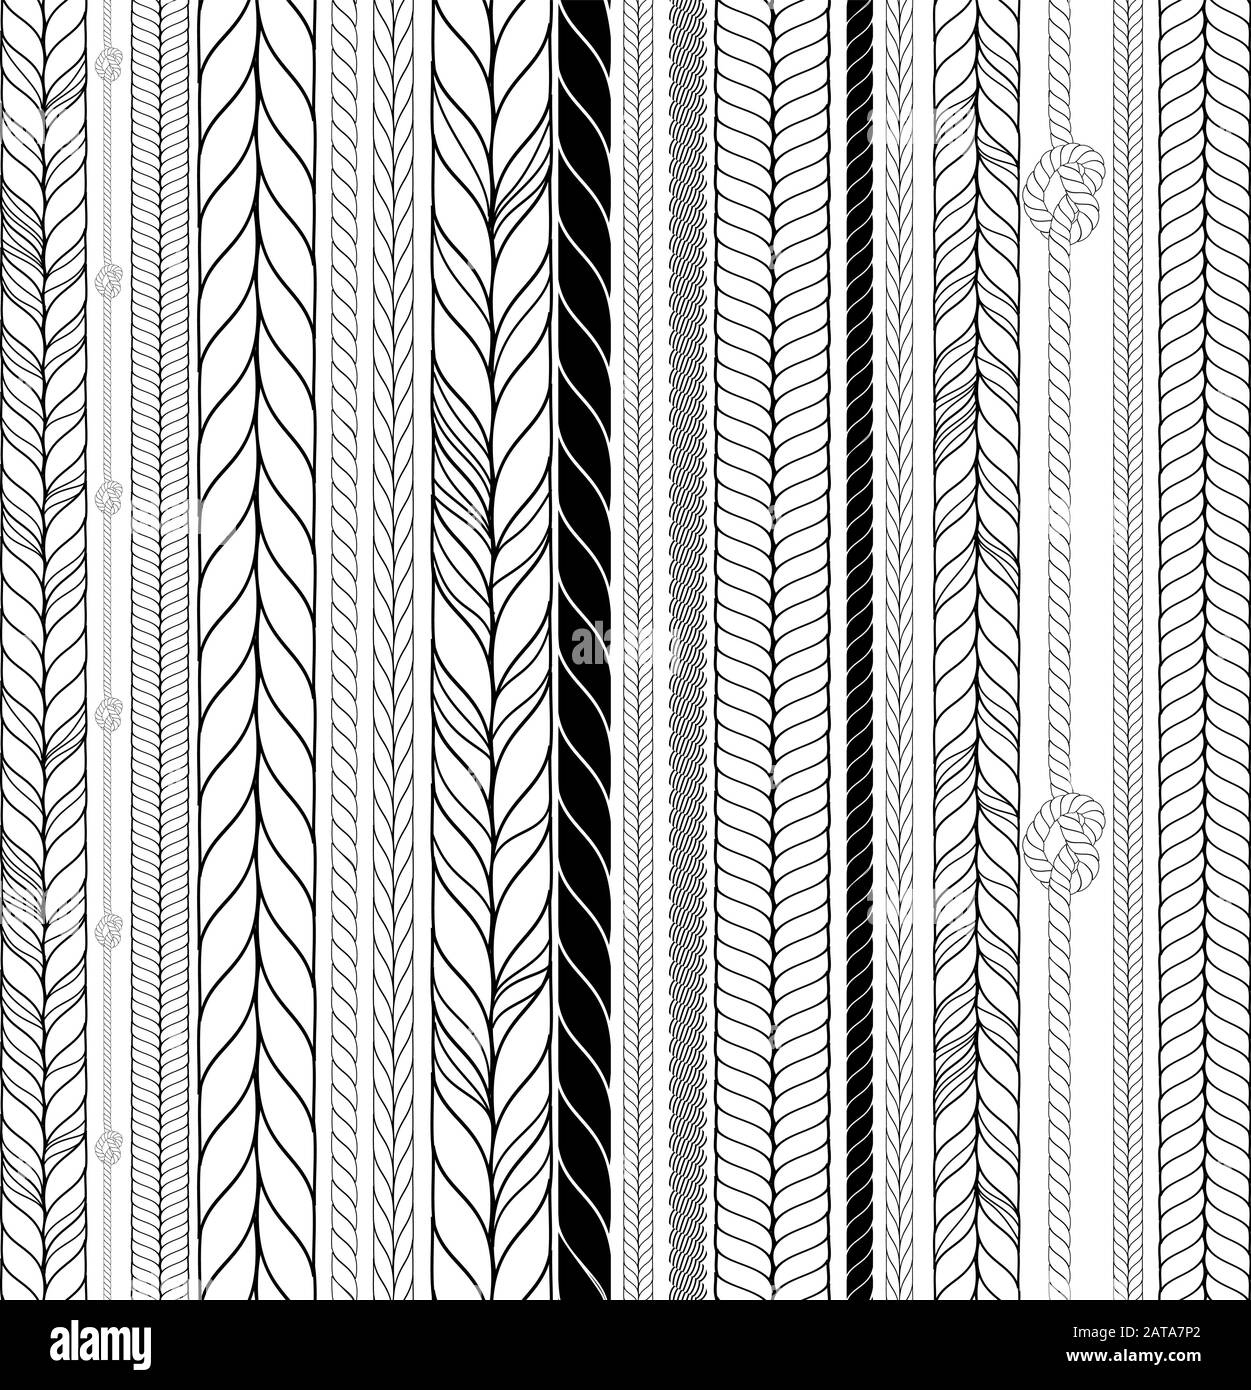 Vector Seamless Black and White Braids and Cords Background - Repeating Simple Ropes Template for Design Project Stock Vector